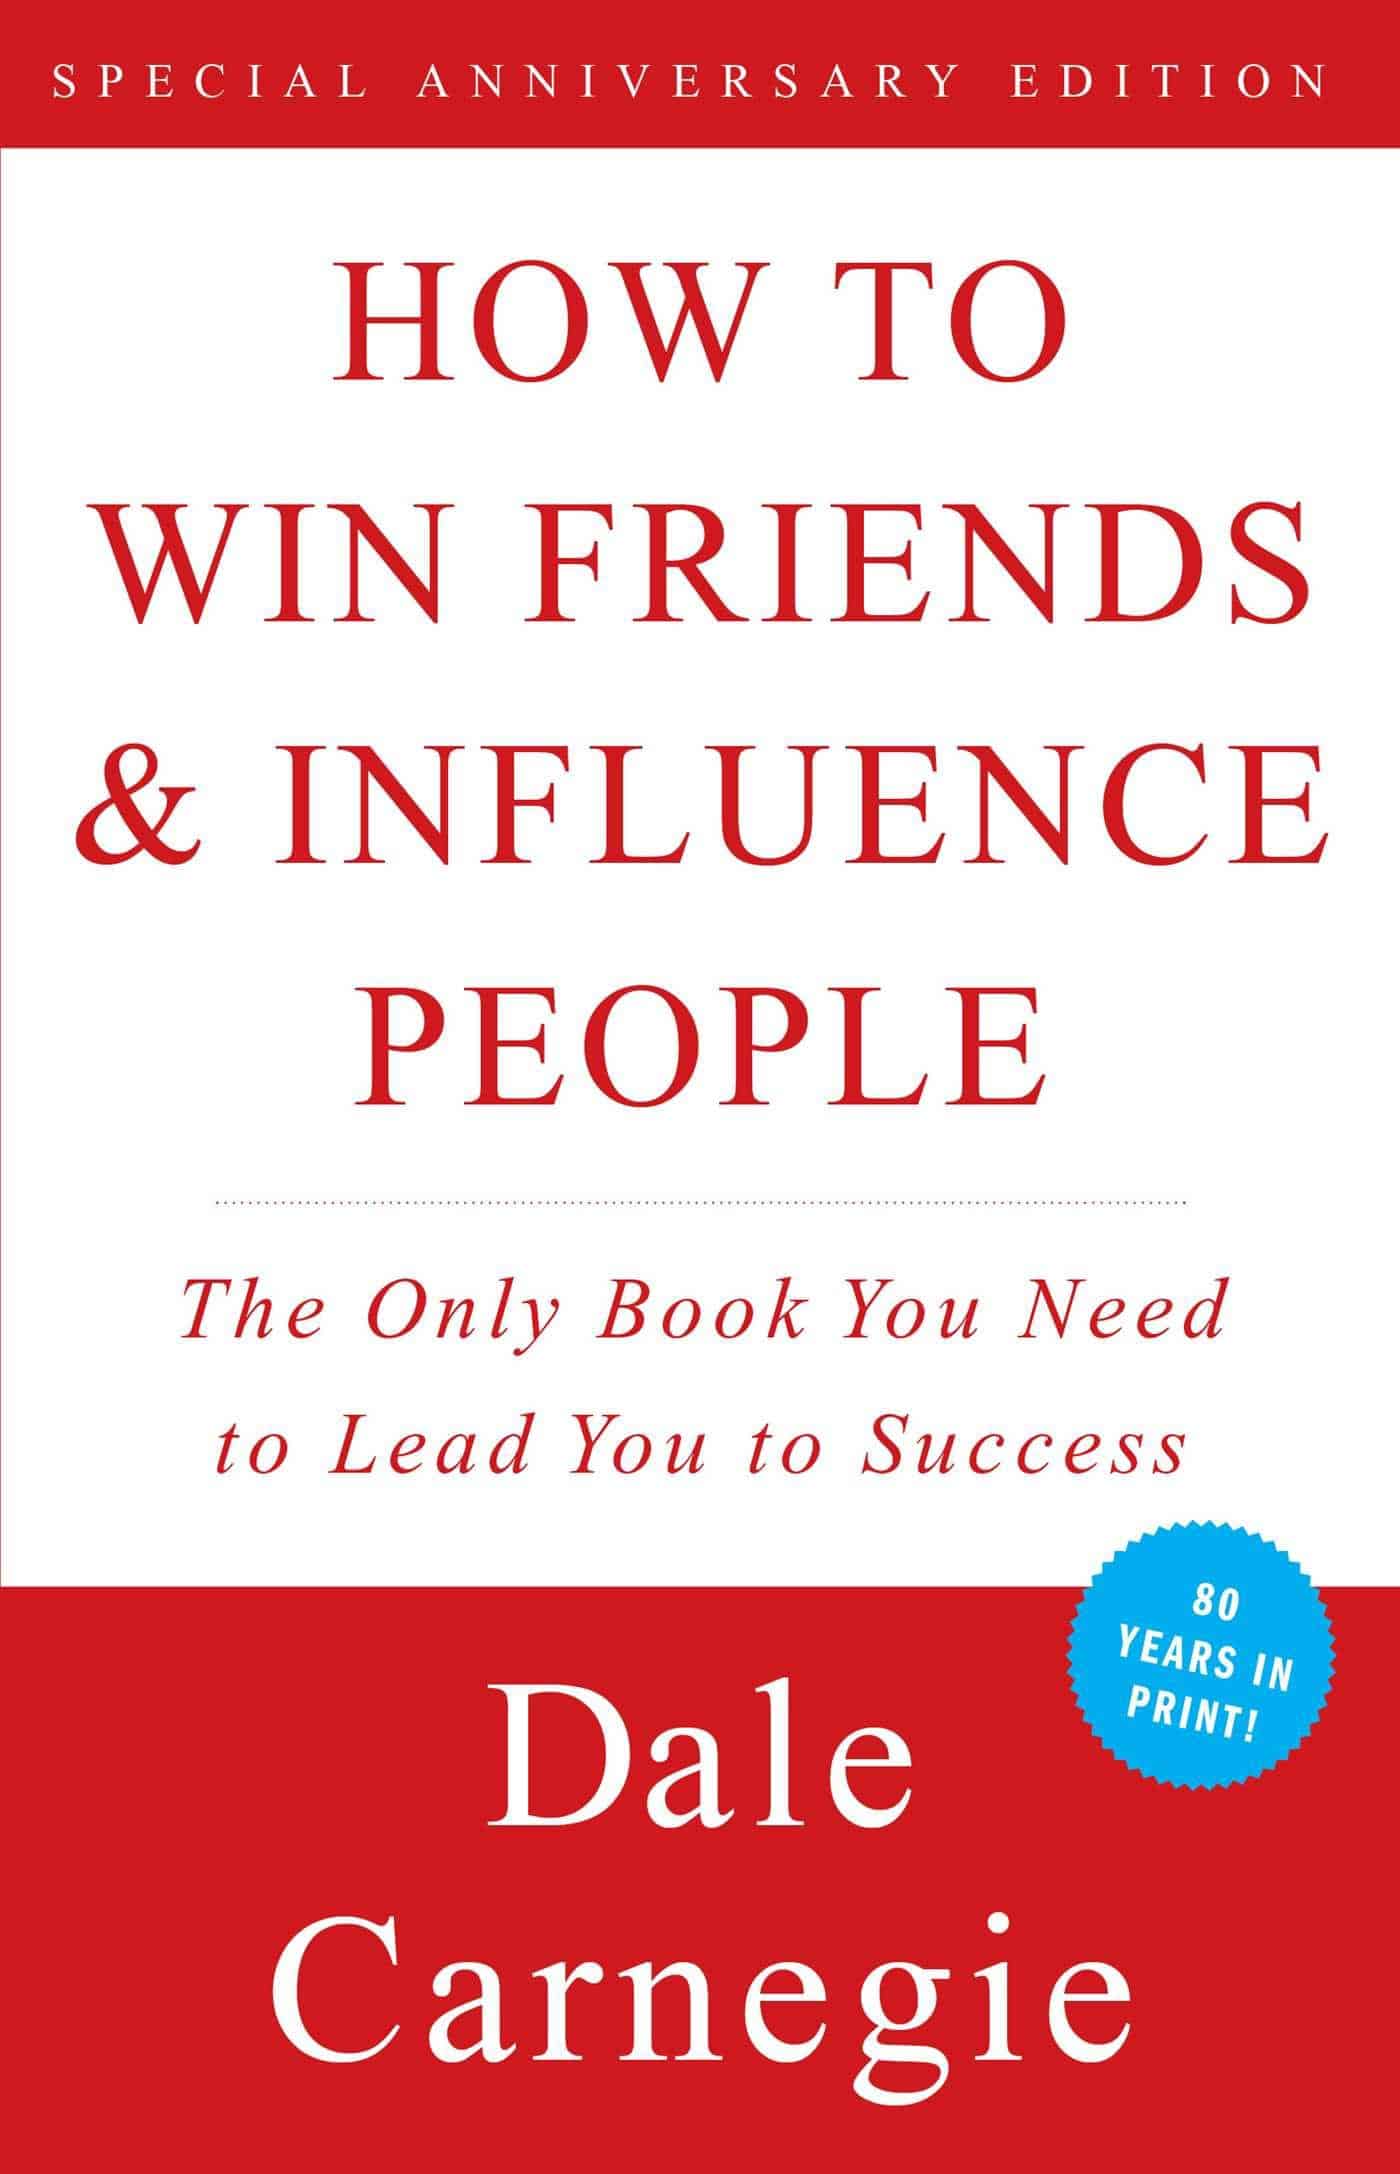 How to Win Friends & Influence People by Dale Carnegie - Self Improvement Book